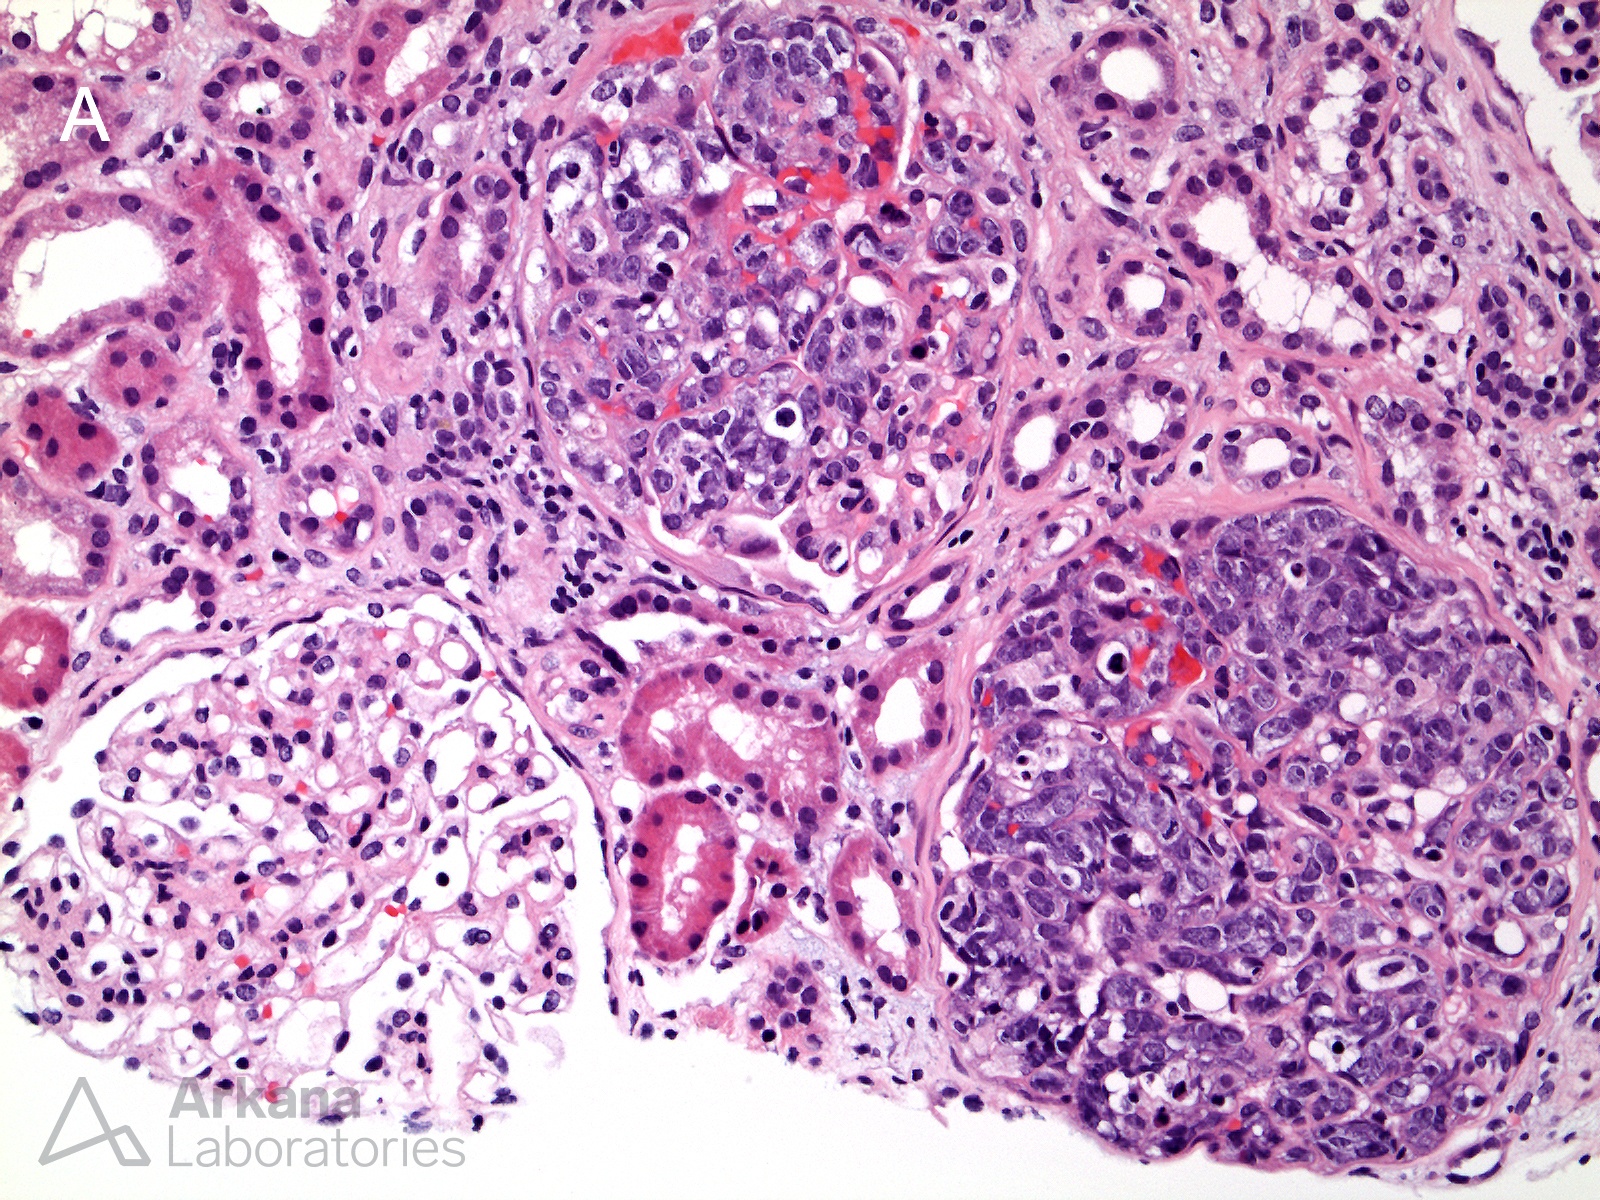 Intravascular Large B Cell Lymphoma, stained positive for CD20